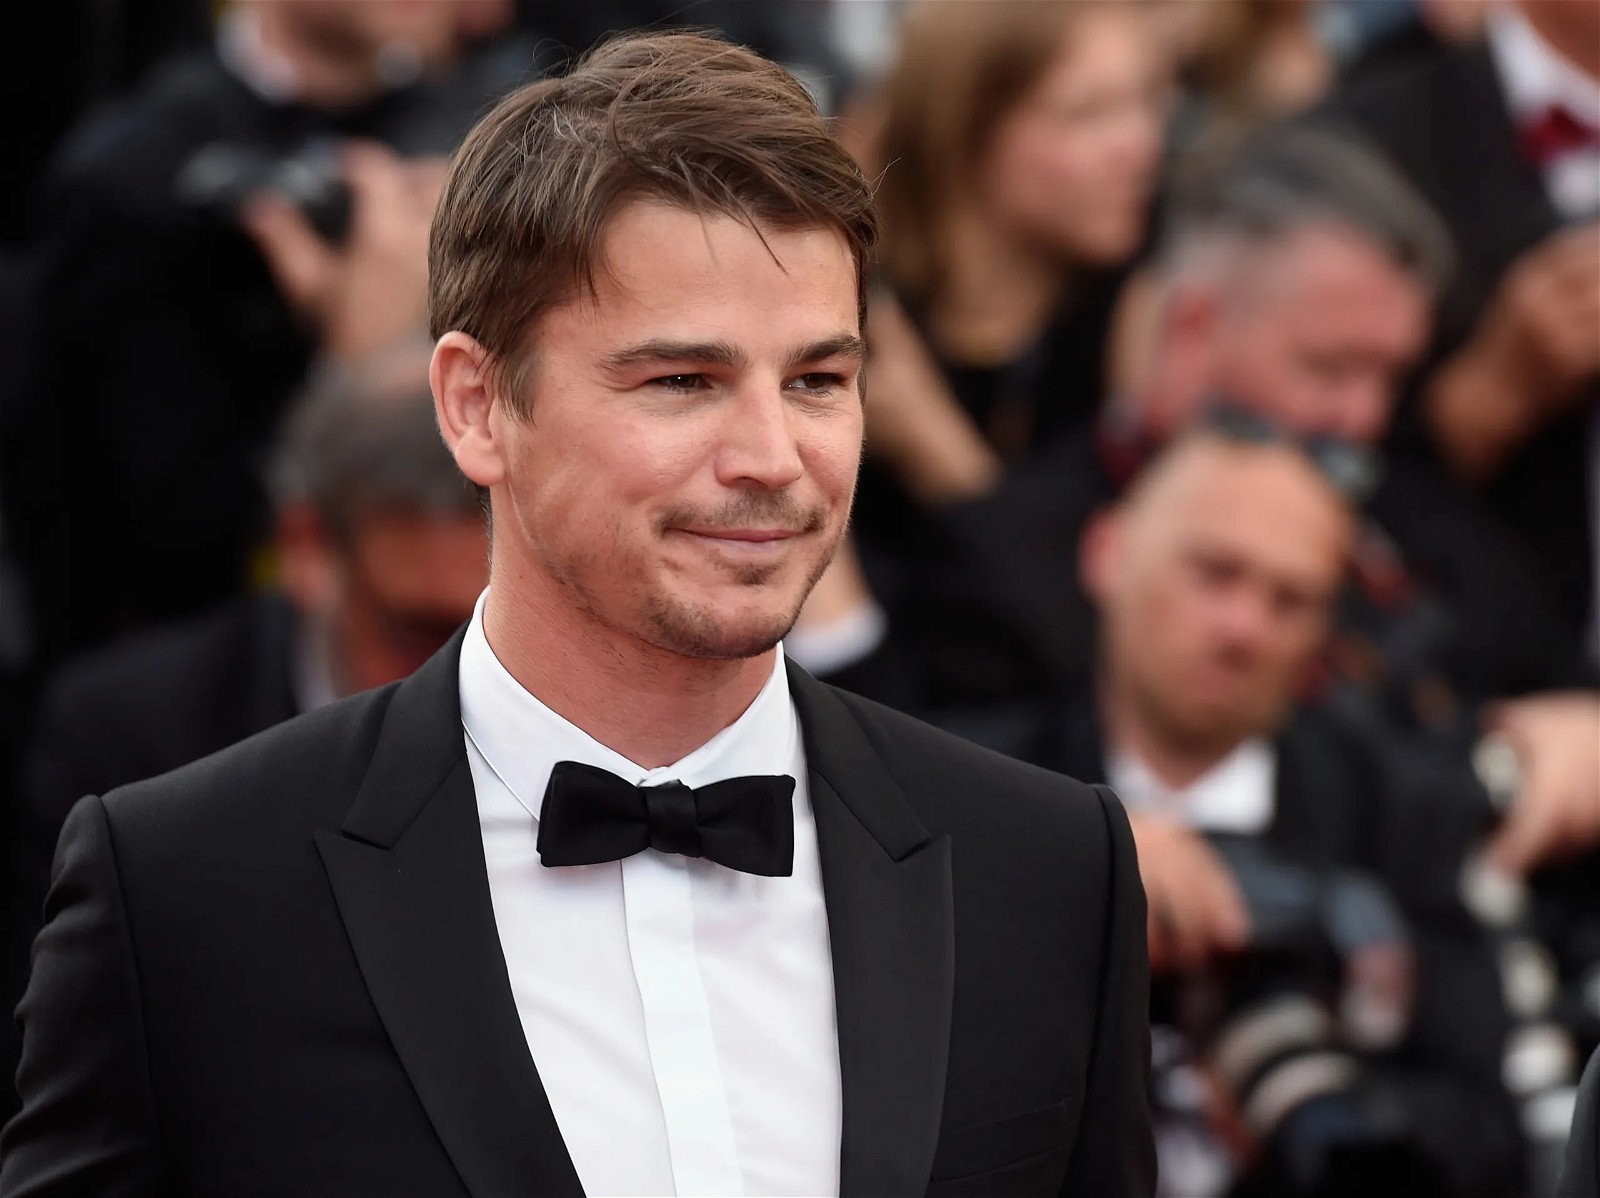 Pascal is perfect, but ain't Josh Hartnett (from Oppenheimer) Joel's first  game model brought to life? : r/Fancast